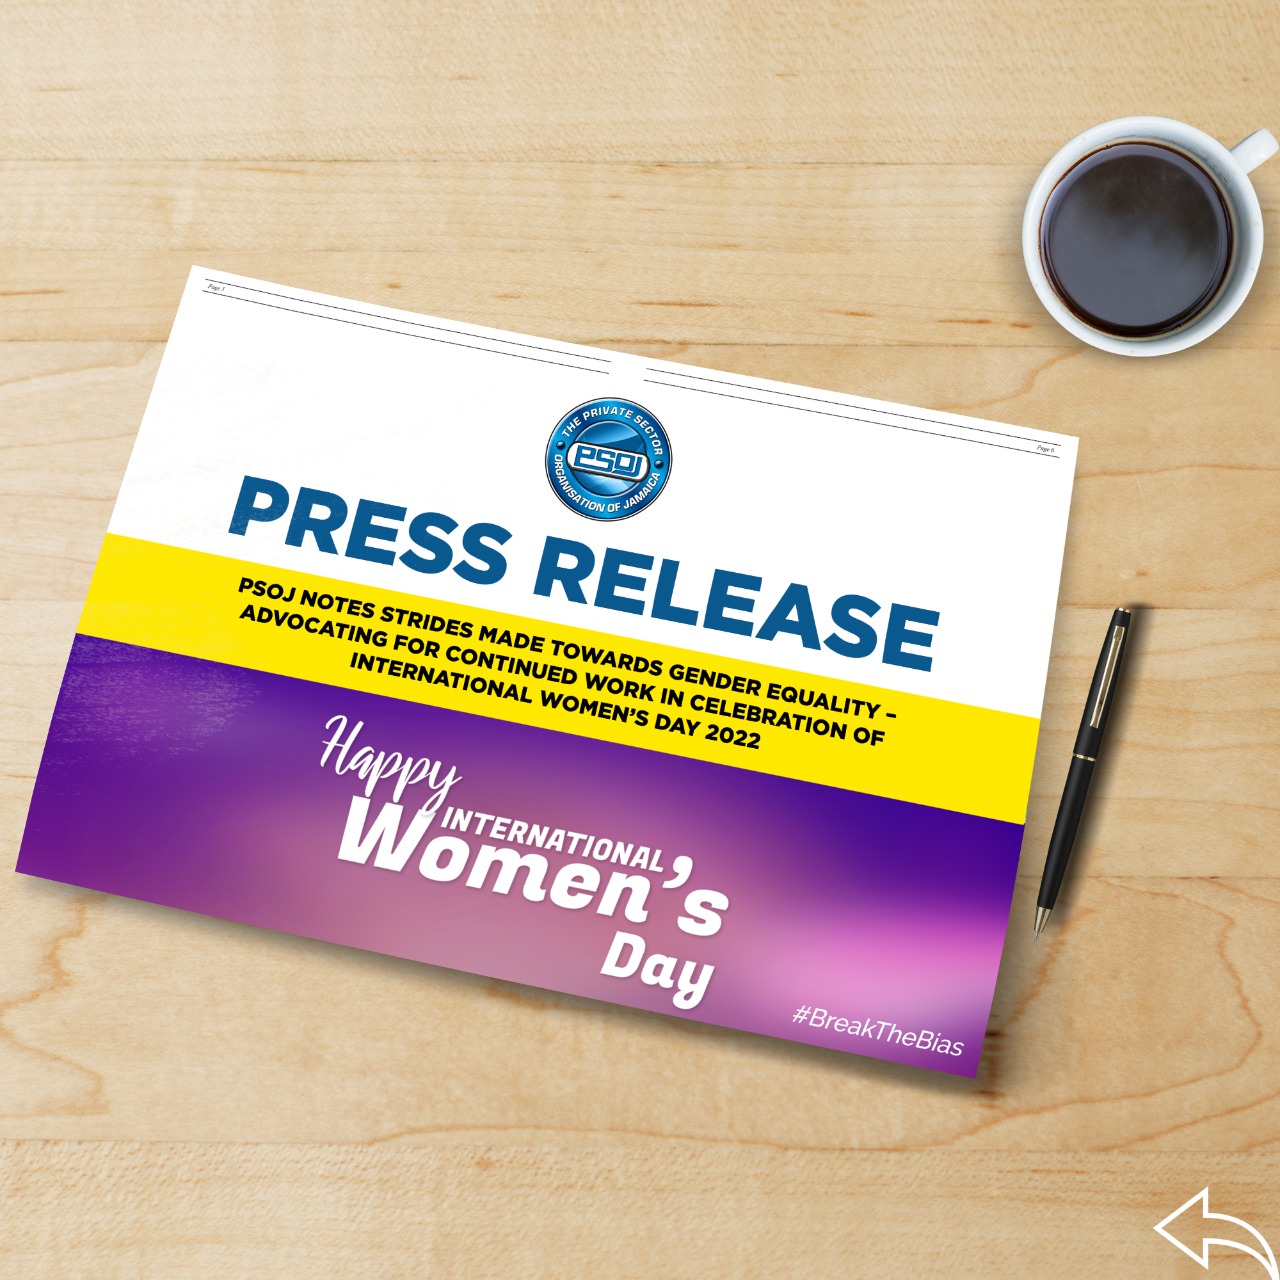 PSOJ notes strides made towards gender equality – advocating for continued work in celebration of International Women’s Day 2022